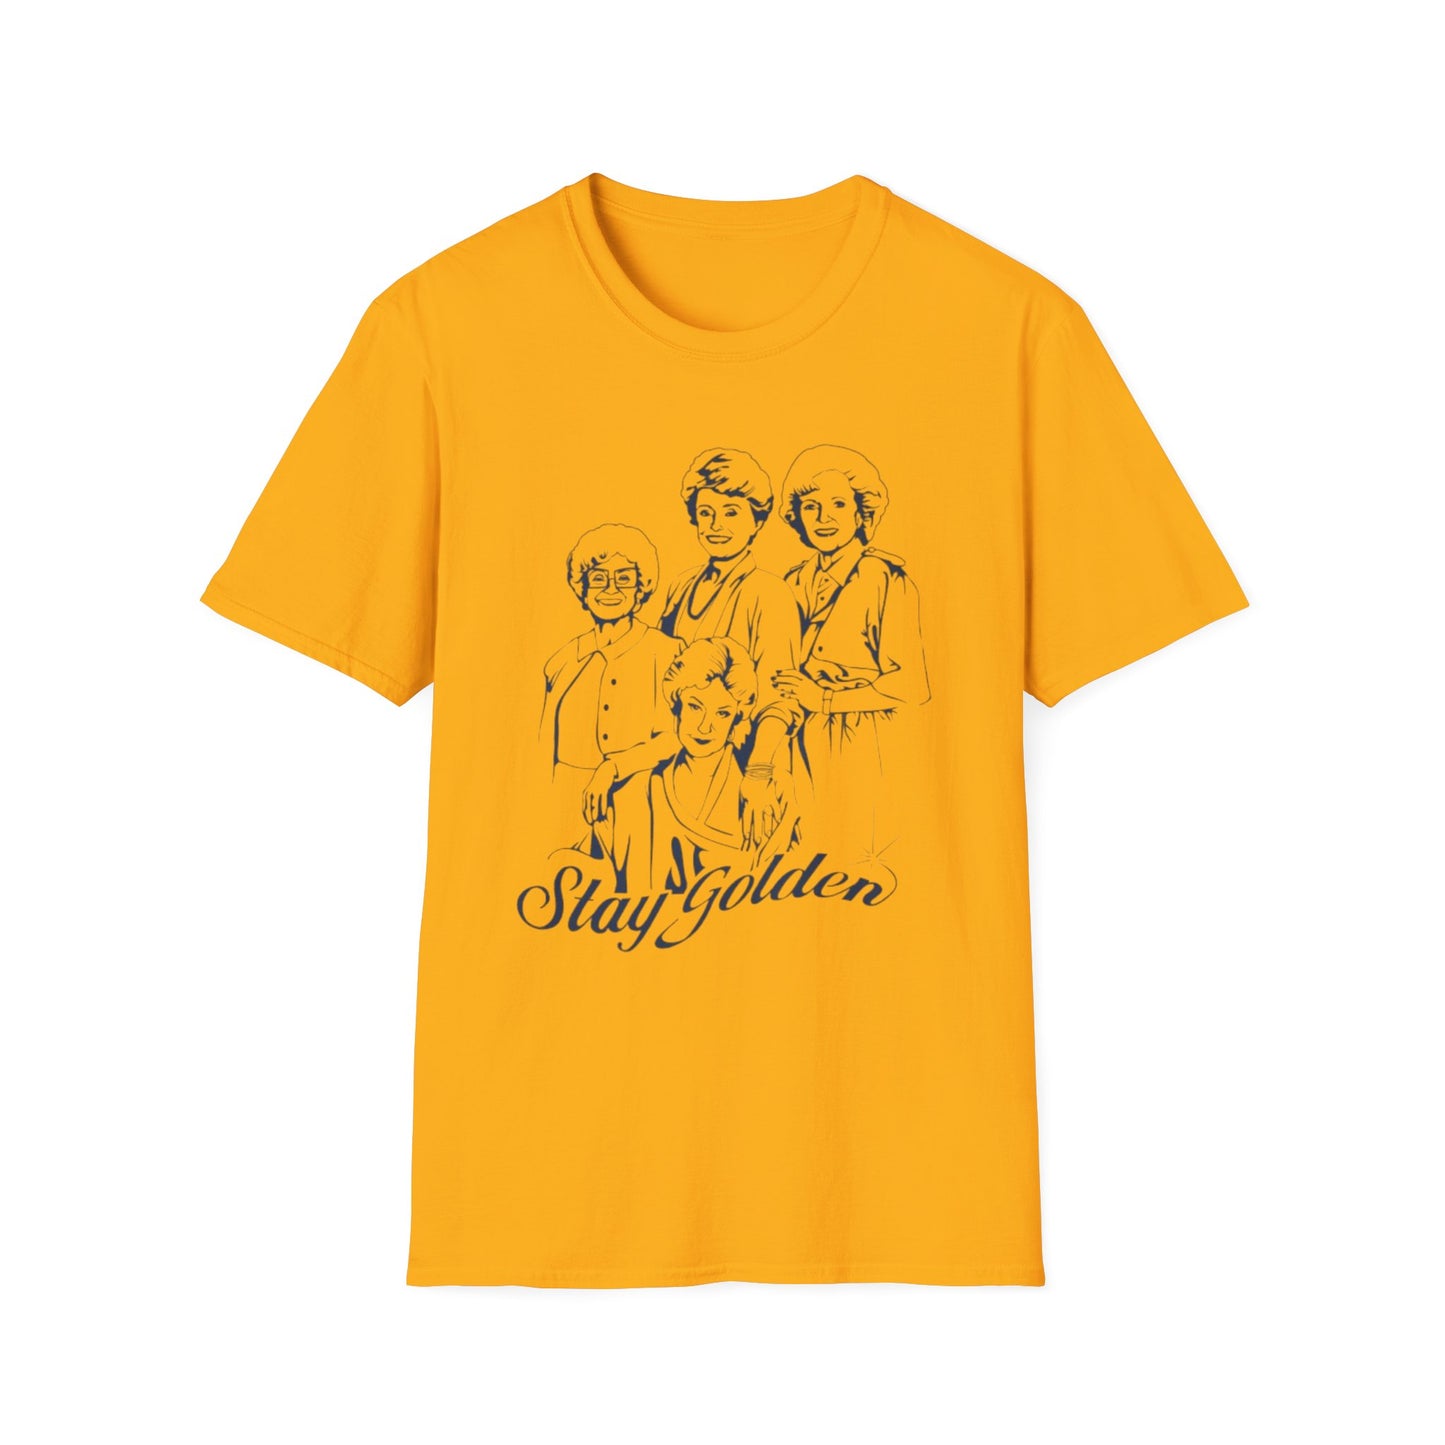 Stay Golden - Unisex Softstyle T-Shirt